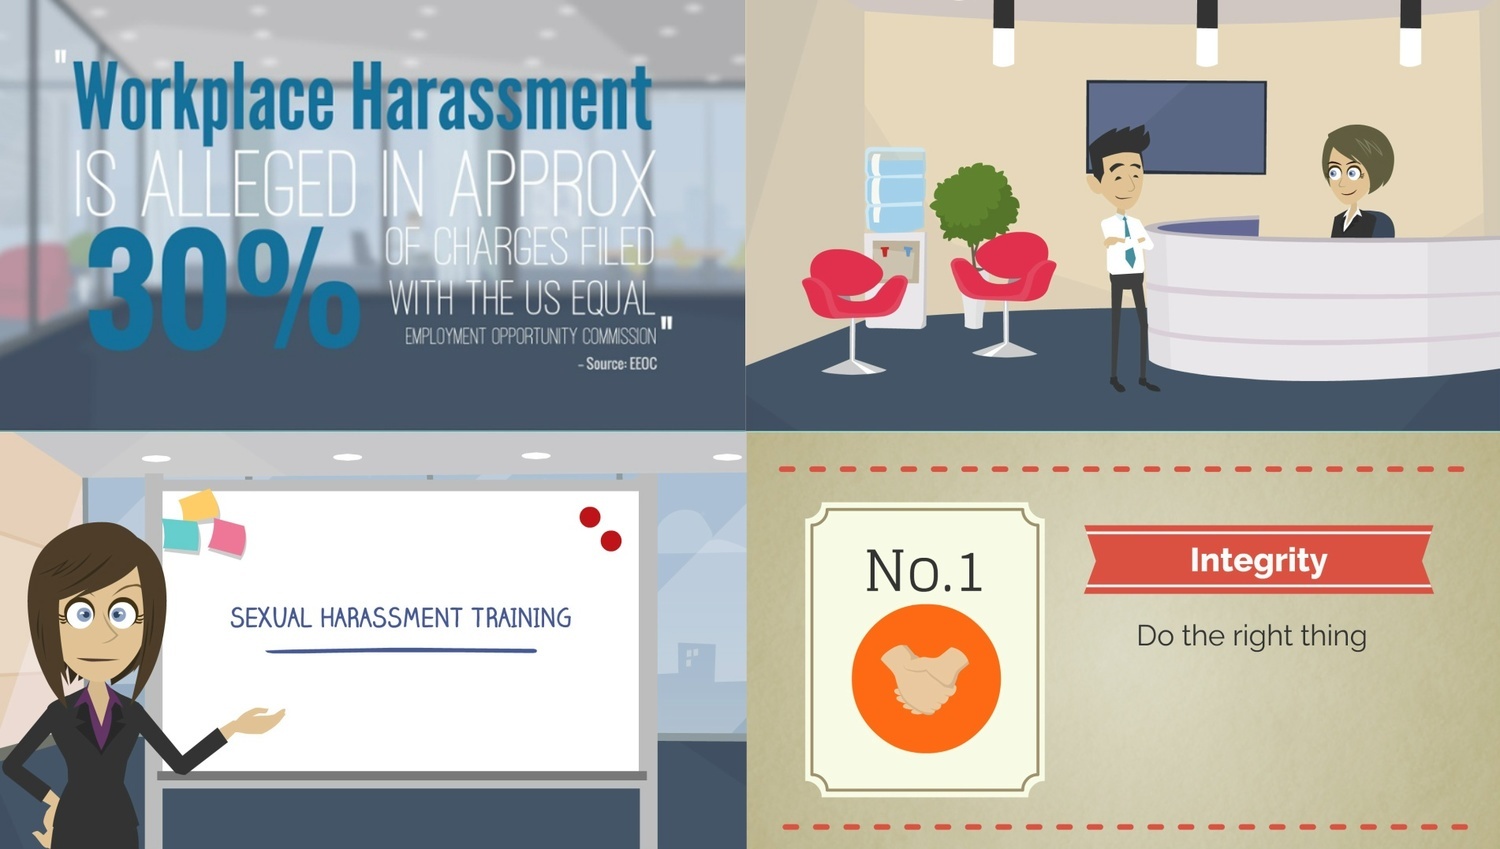 And image showcasing modern and efficient methods of teaching about workplace harassment by using animated videos. 